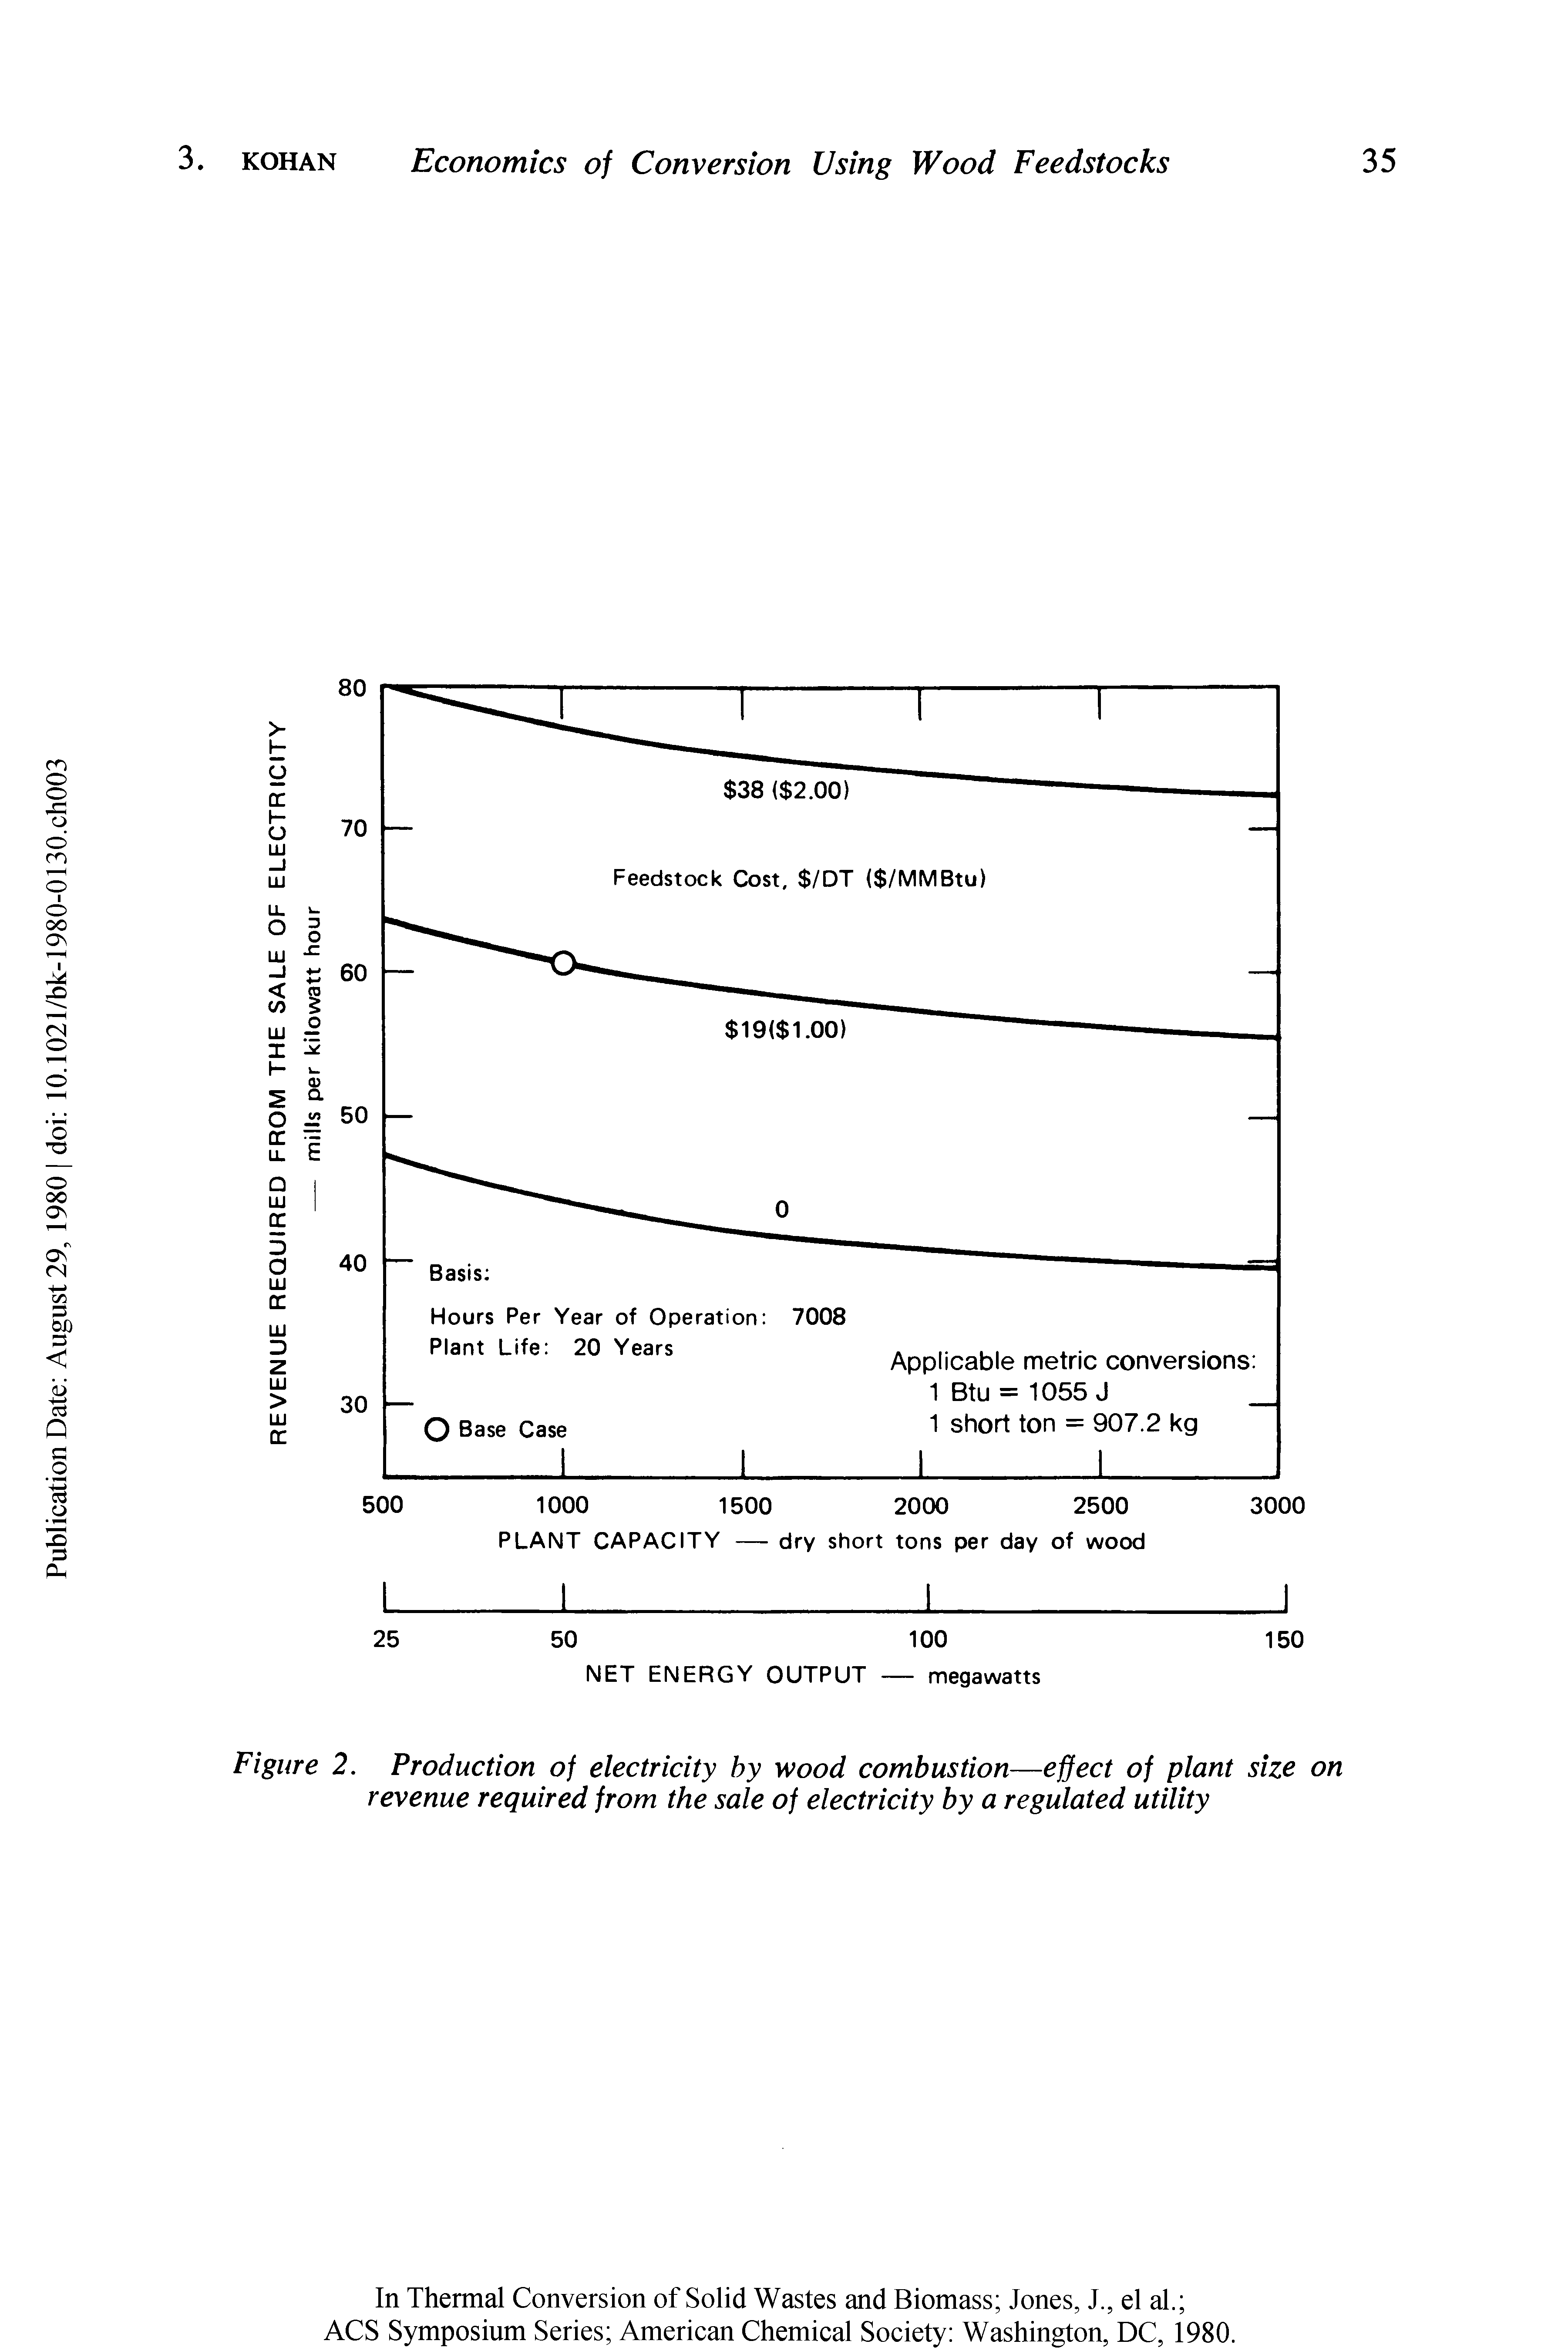 Figure 2. Production of electricity by wood combustion—effect of plant size on revenue required from the sale of electricity by a regulated utility...